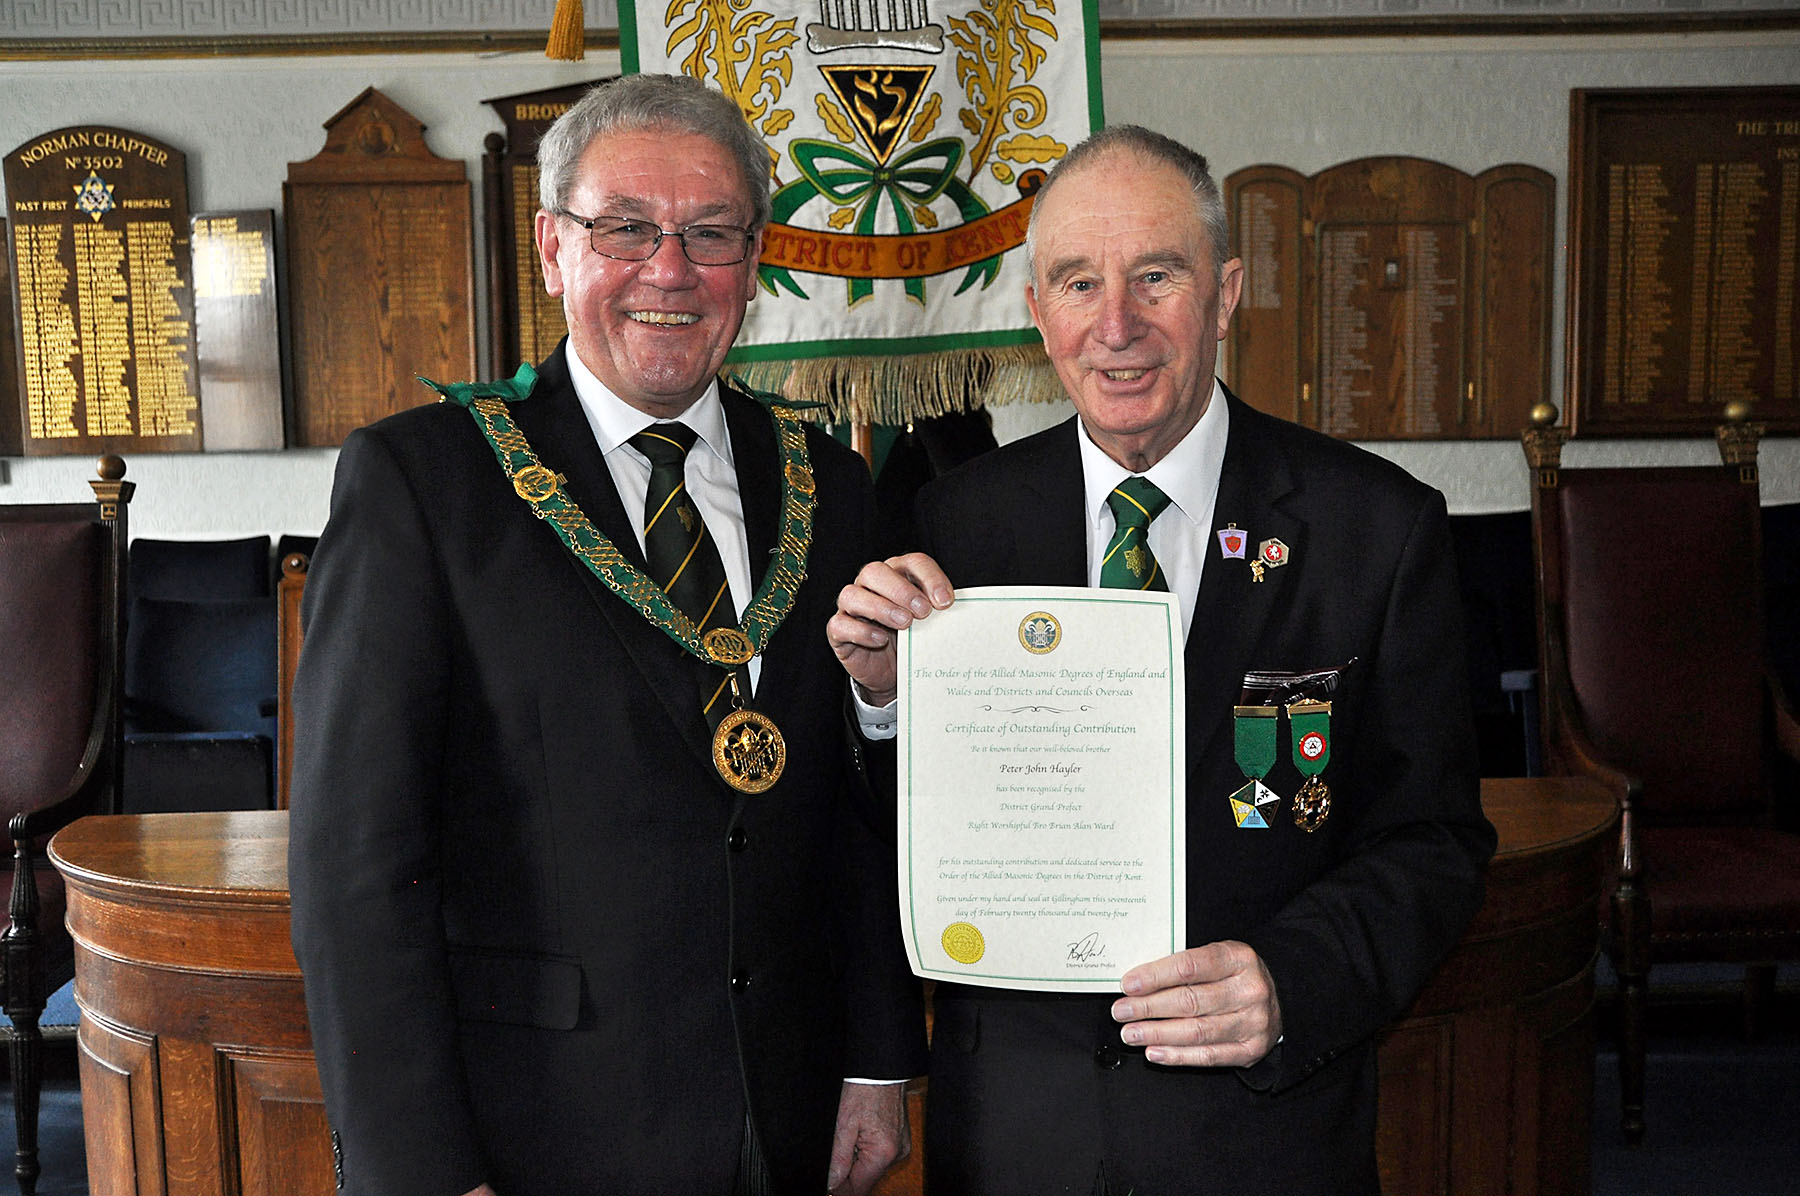 Receiving his certificate for his ‘Outstanding Contribution’ to the District, Peter Hayler in his first year in the Order